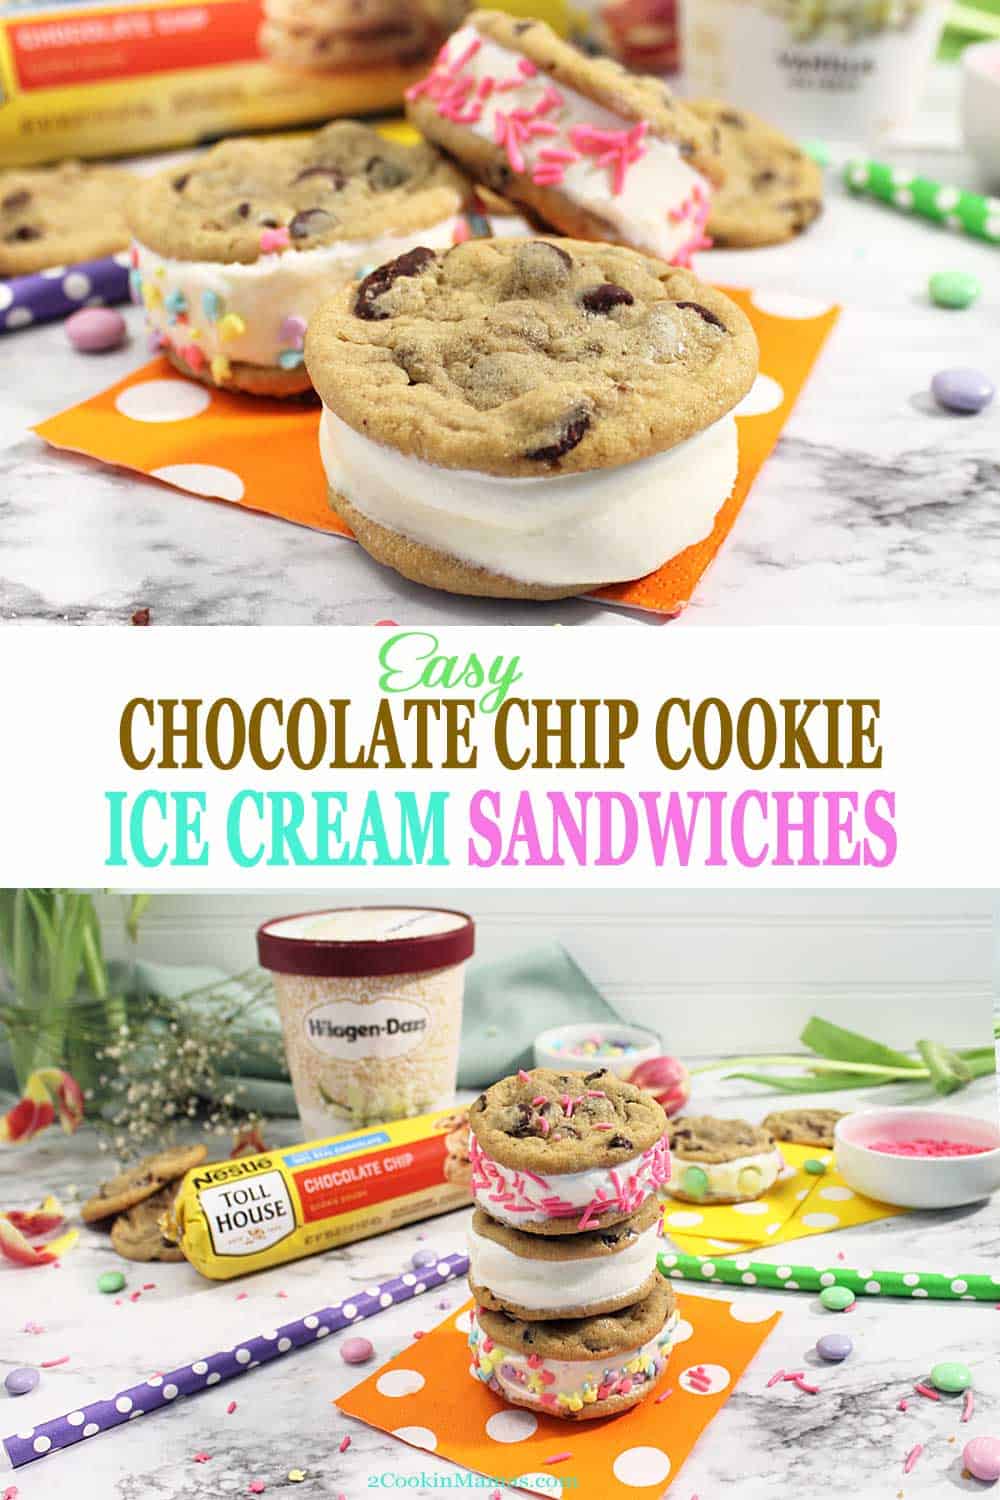 Easy Chocolate Chip Cookie Ice Cream Sandwiches